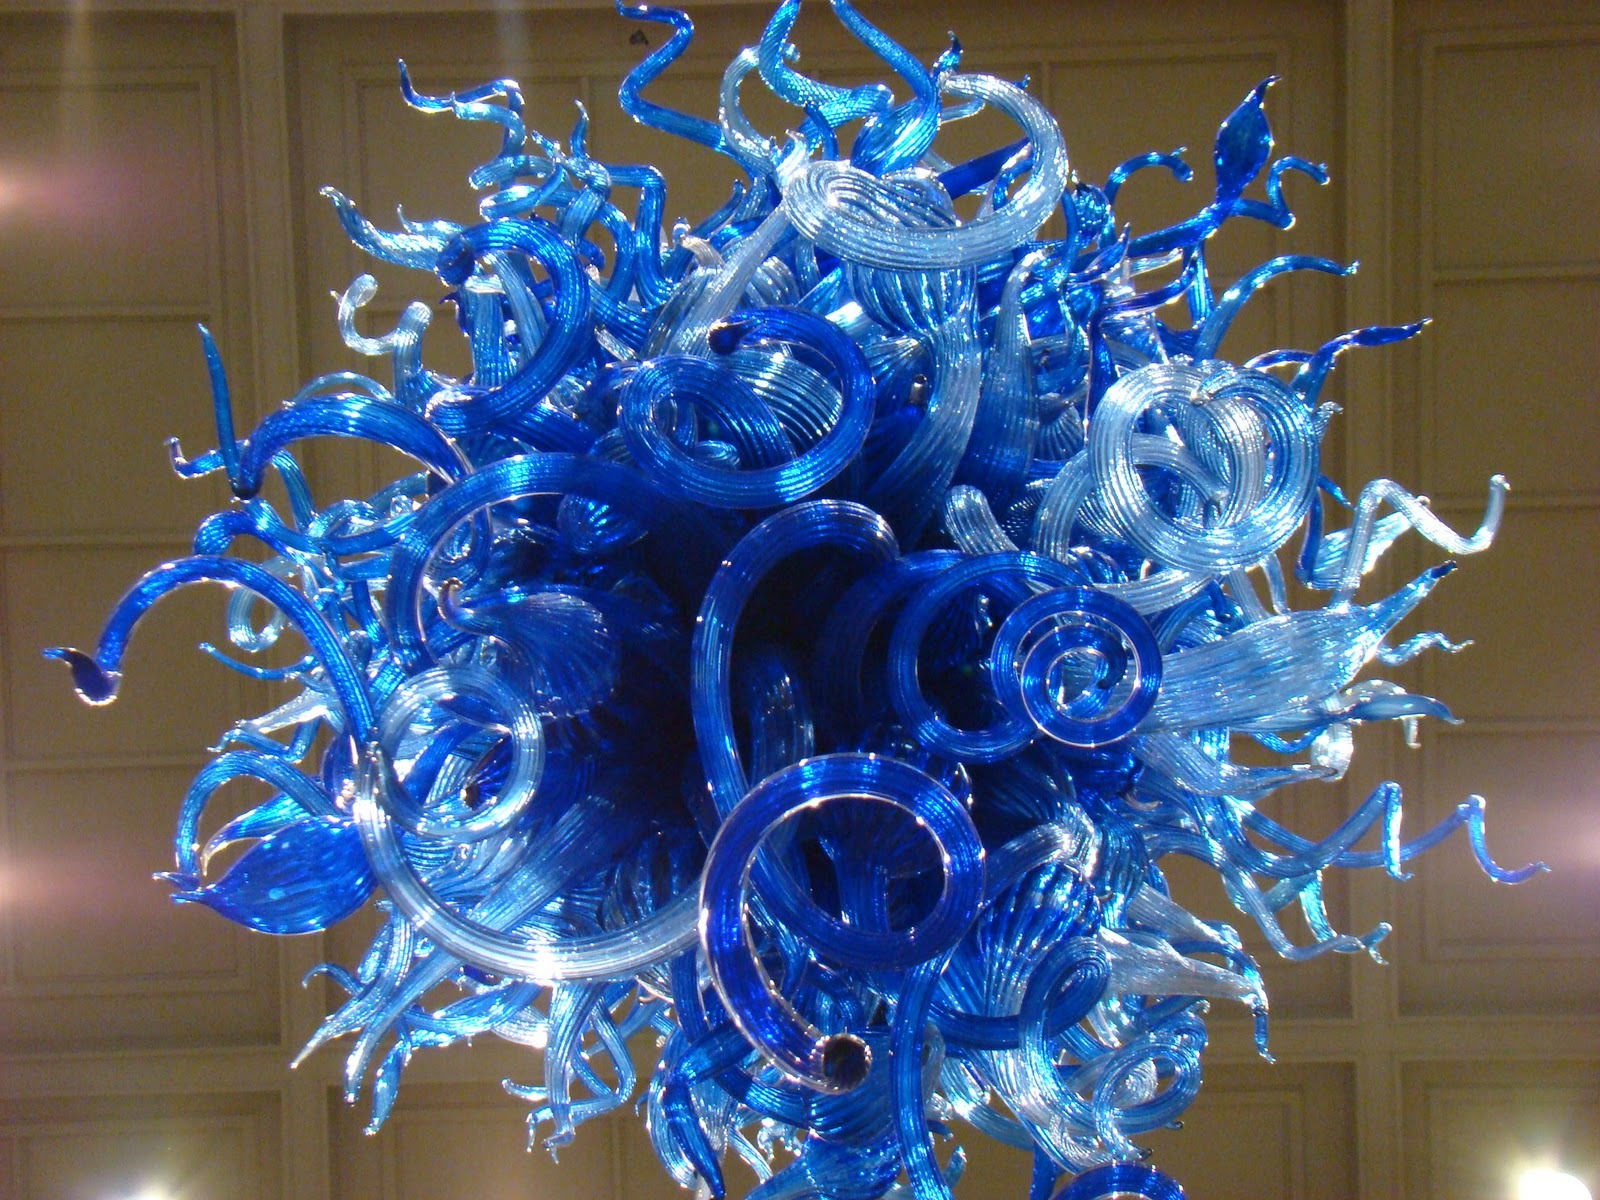 Dale Chihuly sculpture